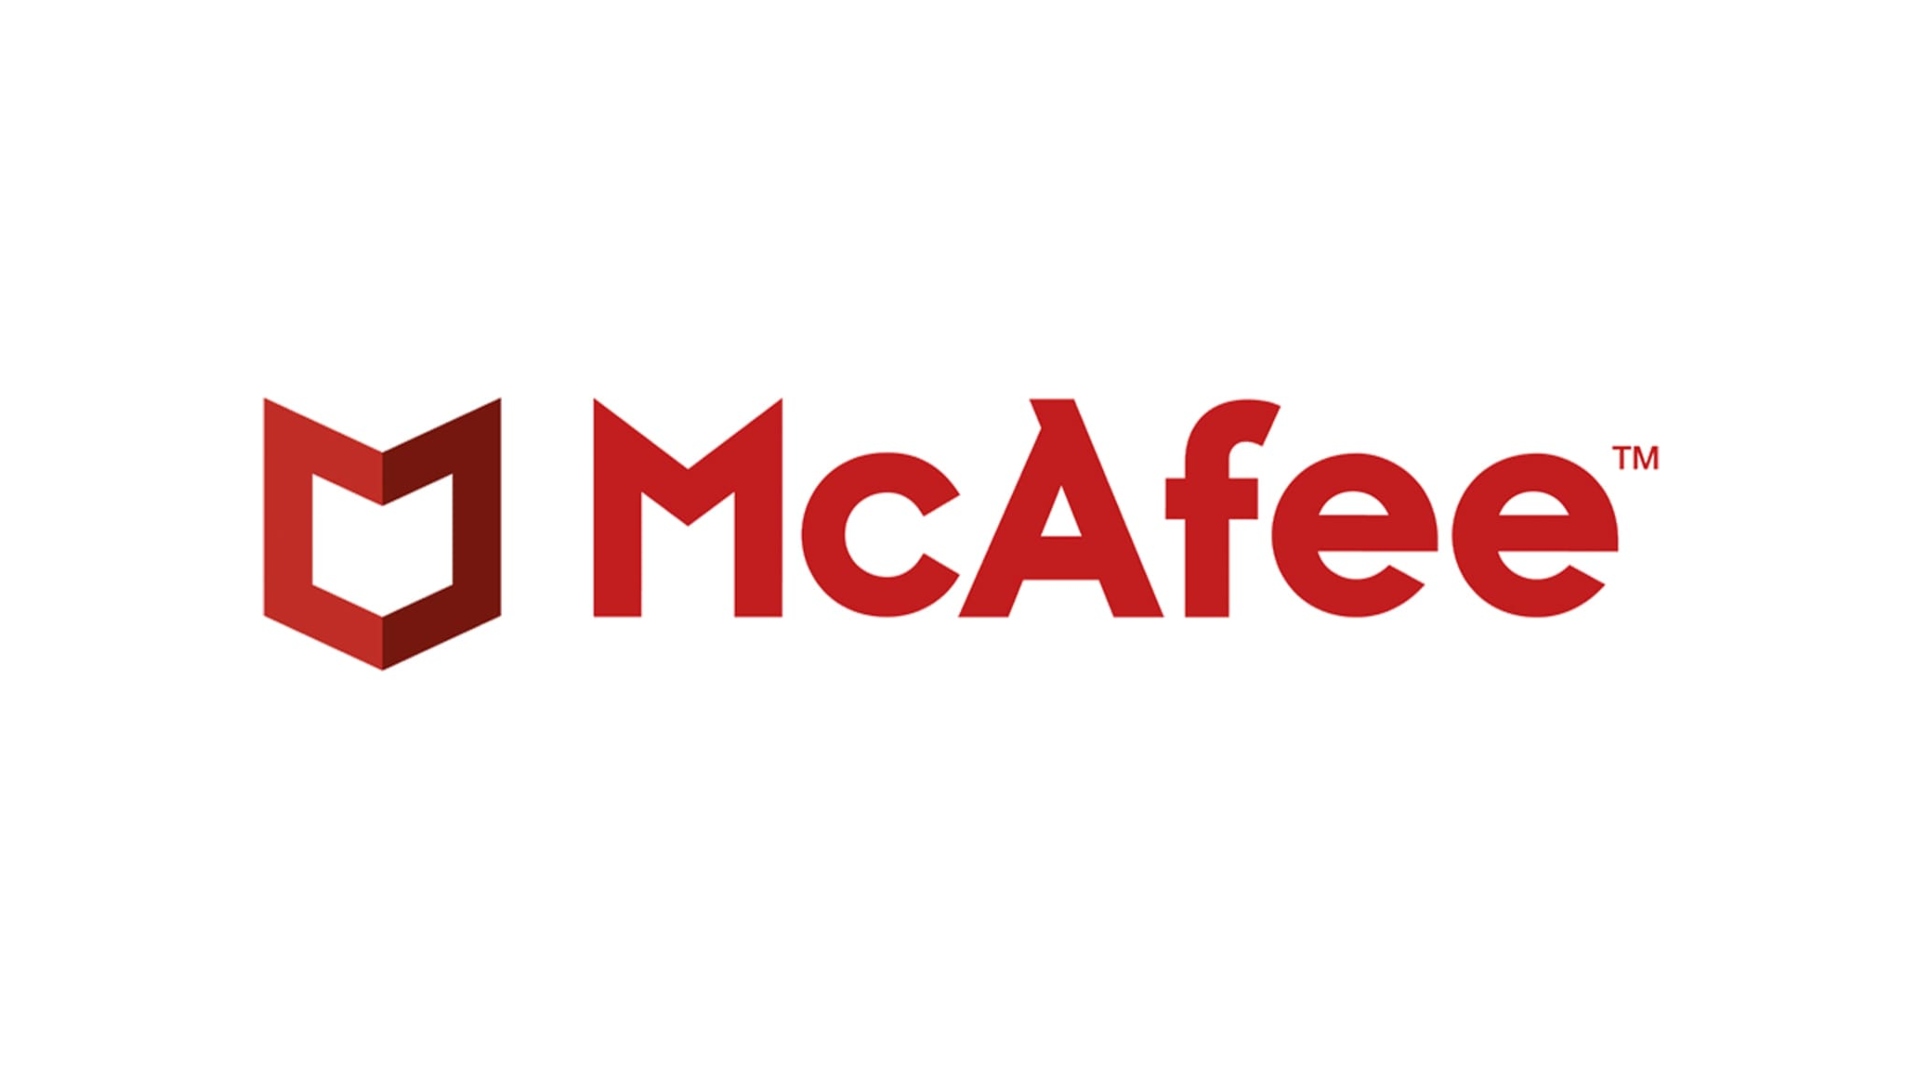 Best antivirus: McAfee written in red on a white background alongside its insignia.